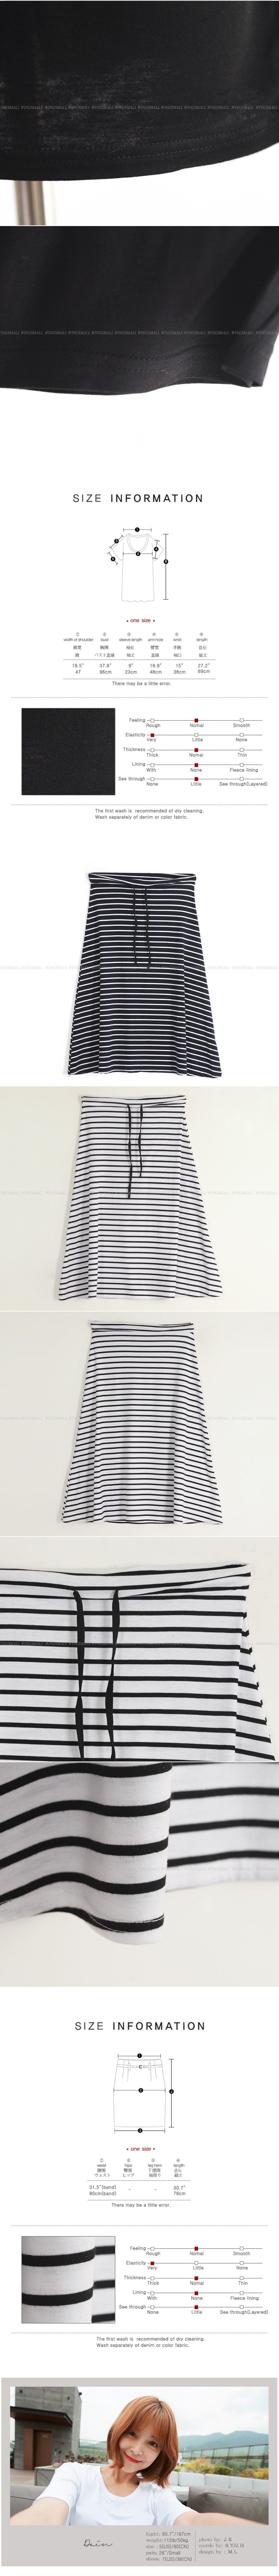 [Special Offer] Soft U-neck Loose T-shirt and Striped A-Line String Skirt 2pieces Set #Ivory+Navy One Size(Free)